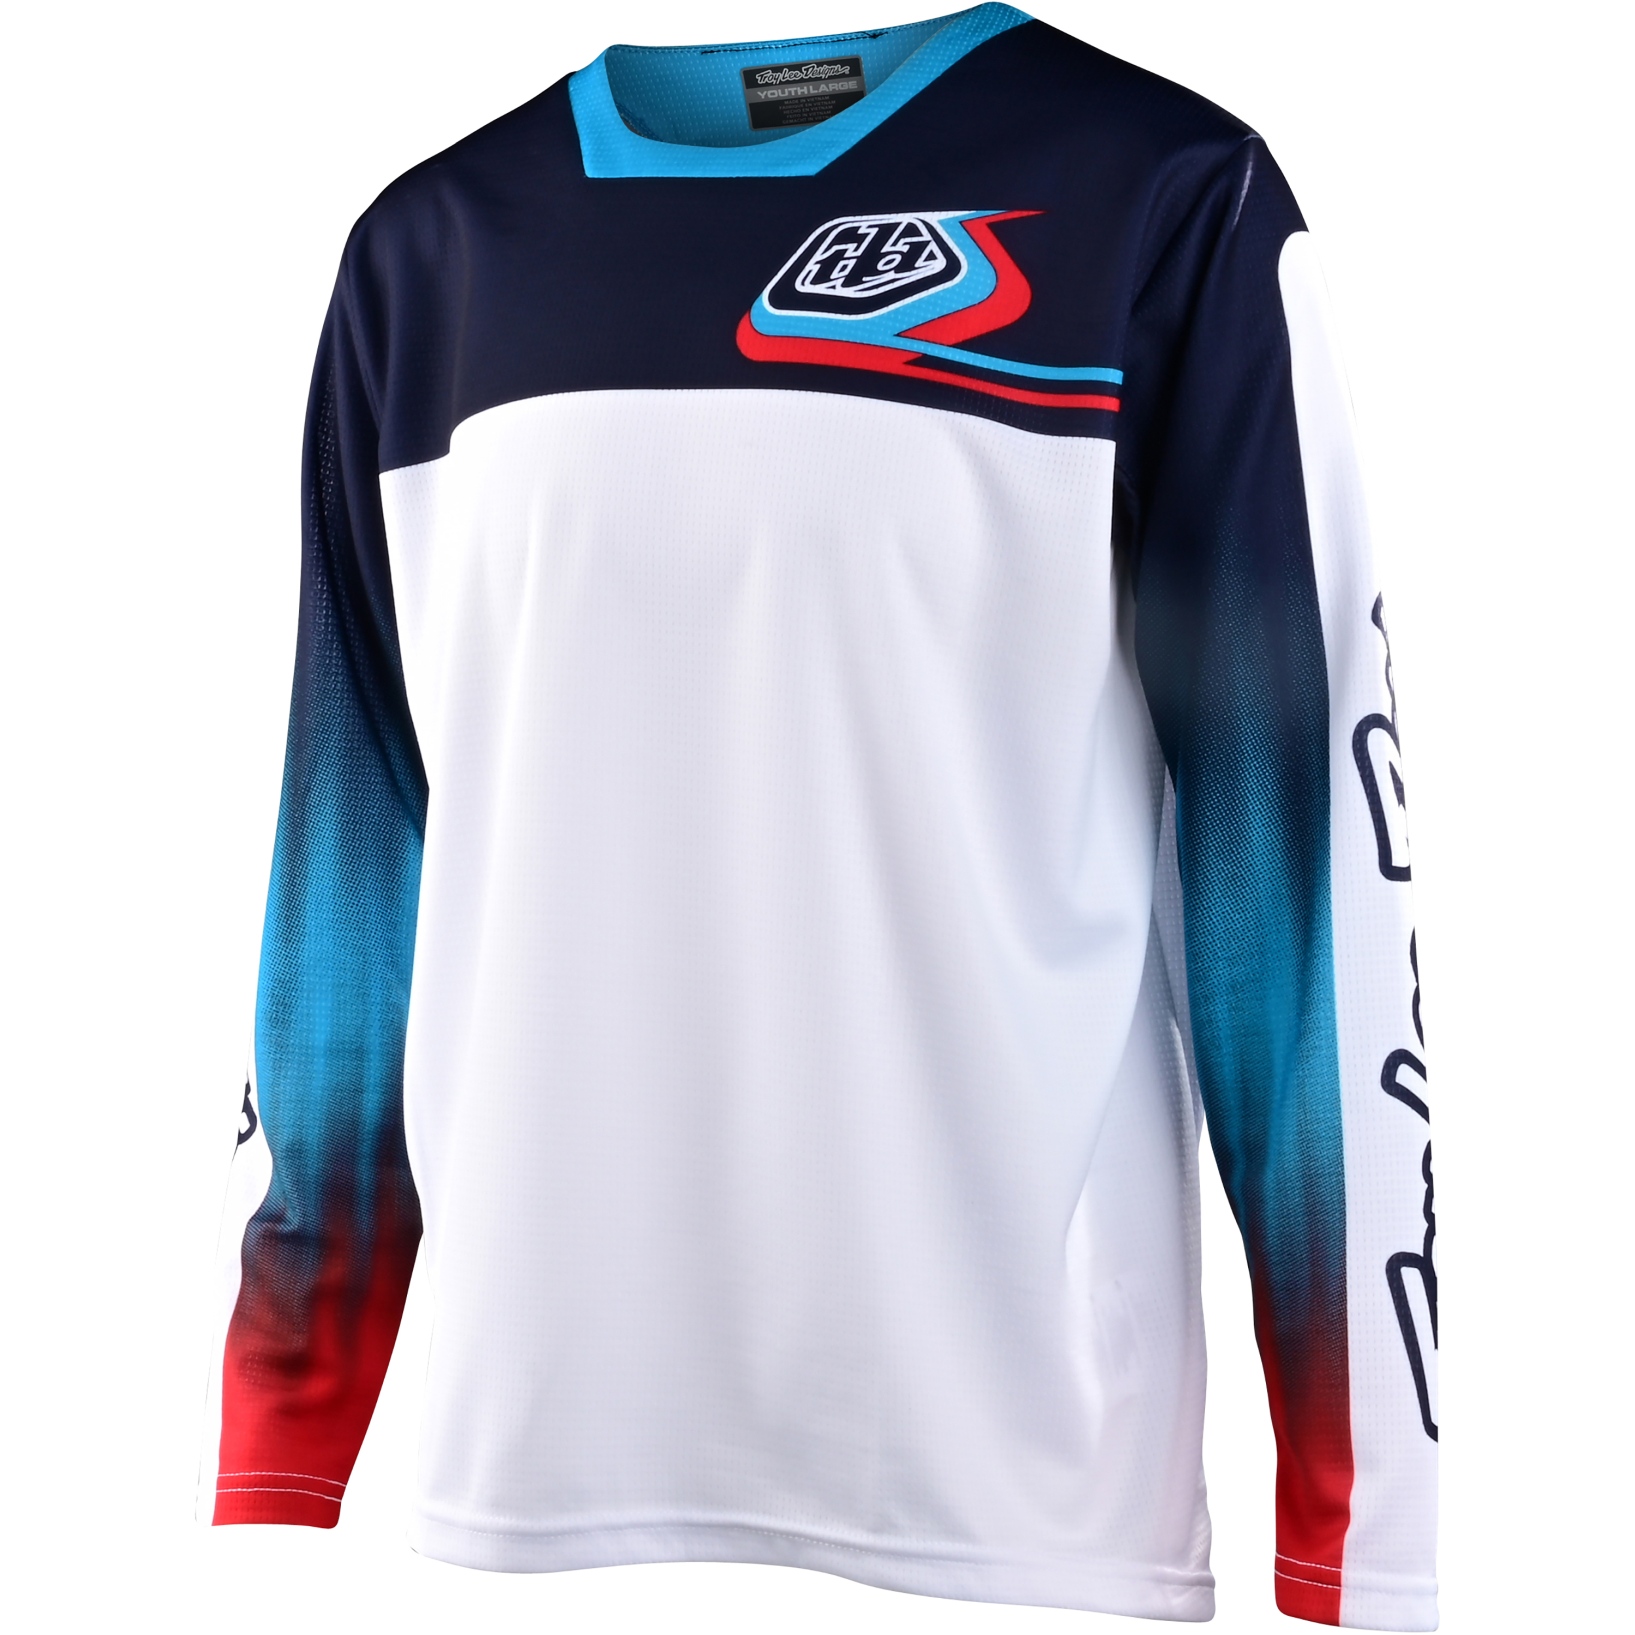 Image of Troy Lee Designs Sprint Jersey Youth - Jet Fuel White